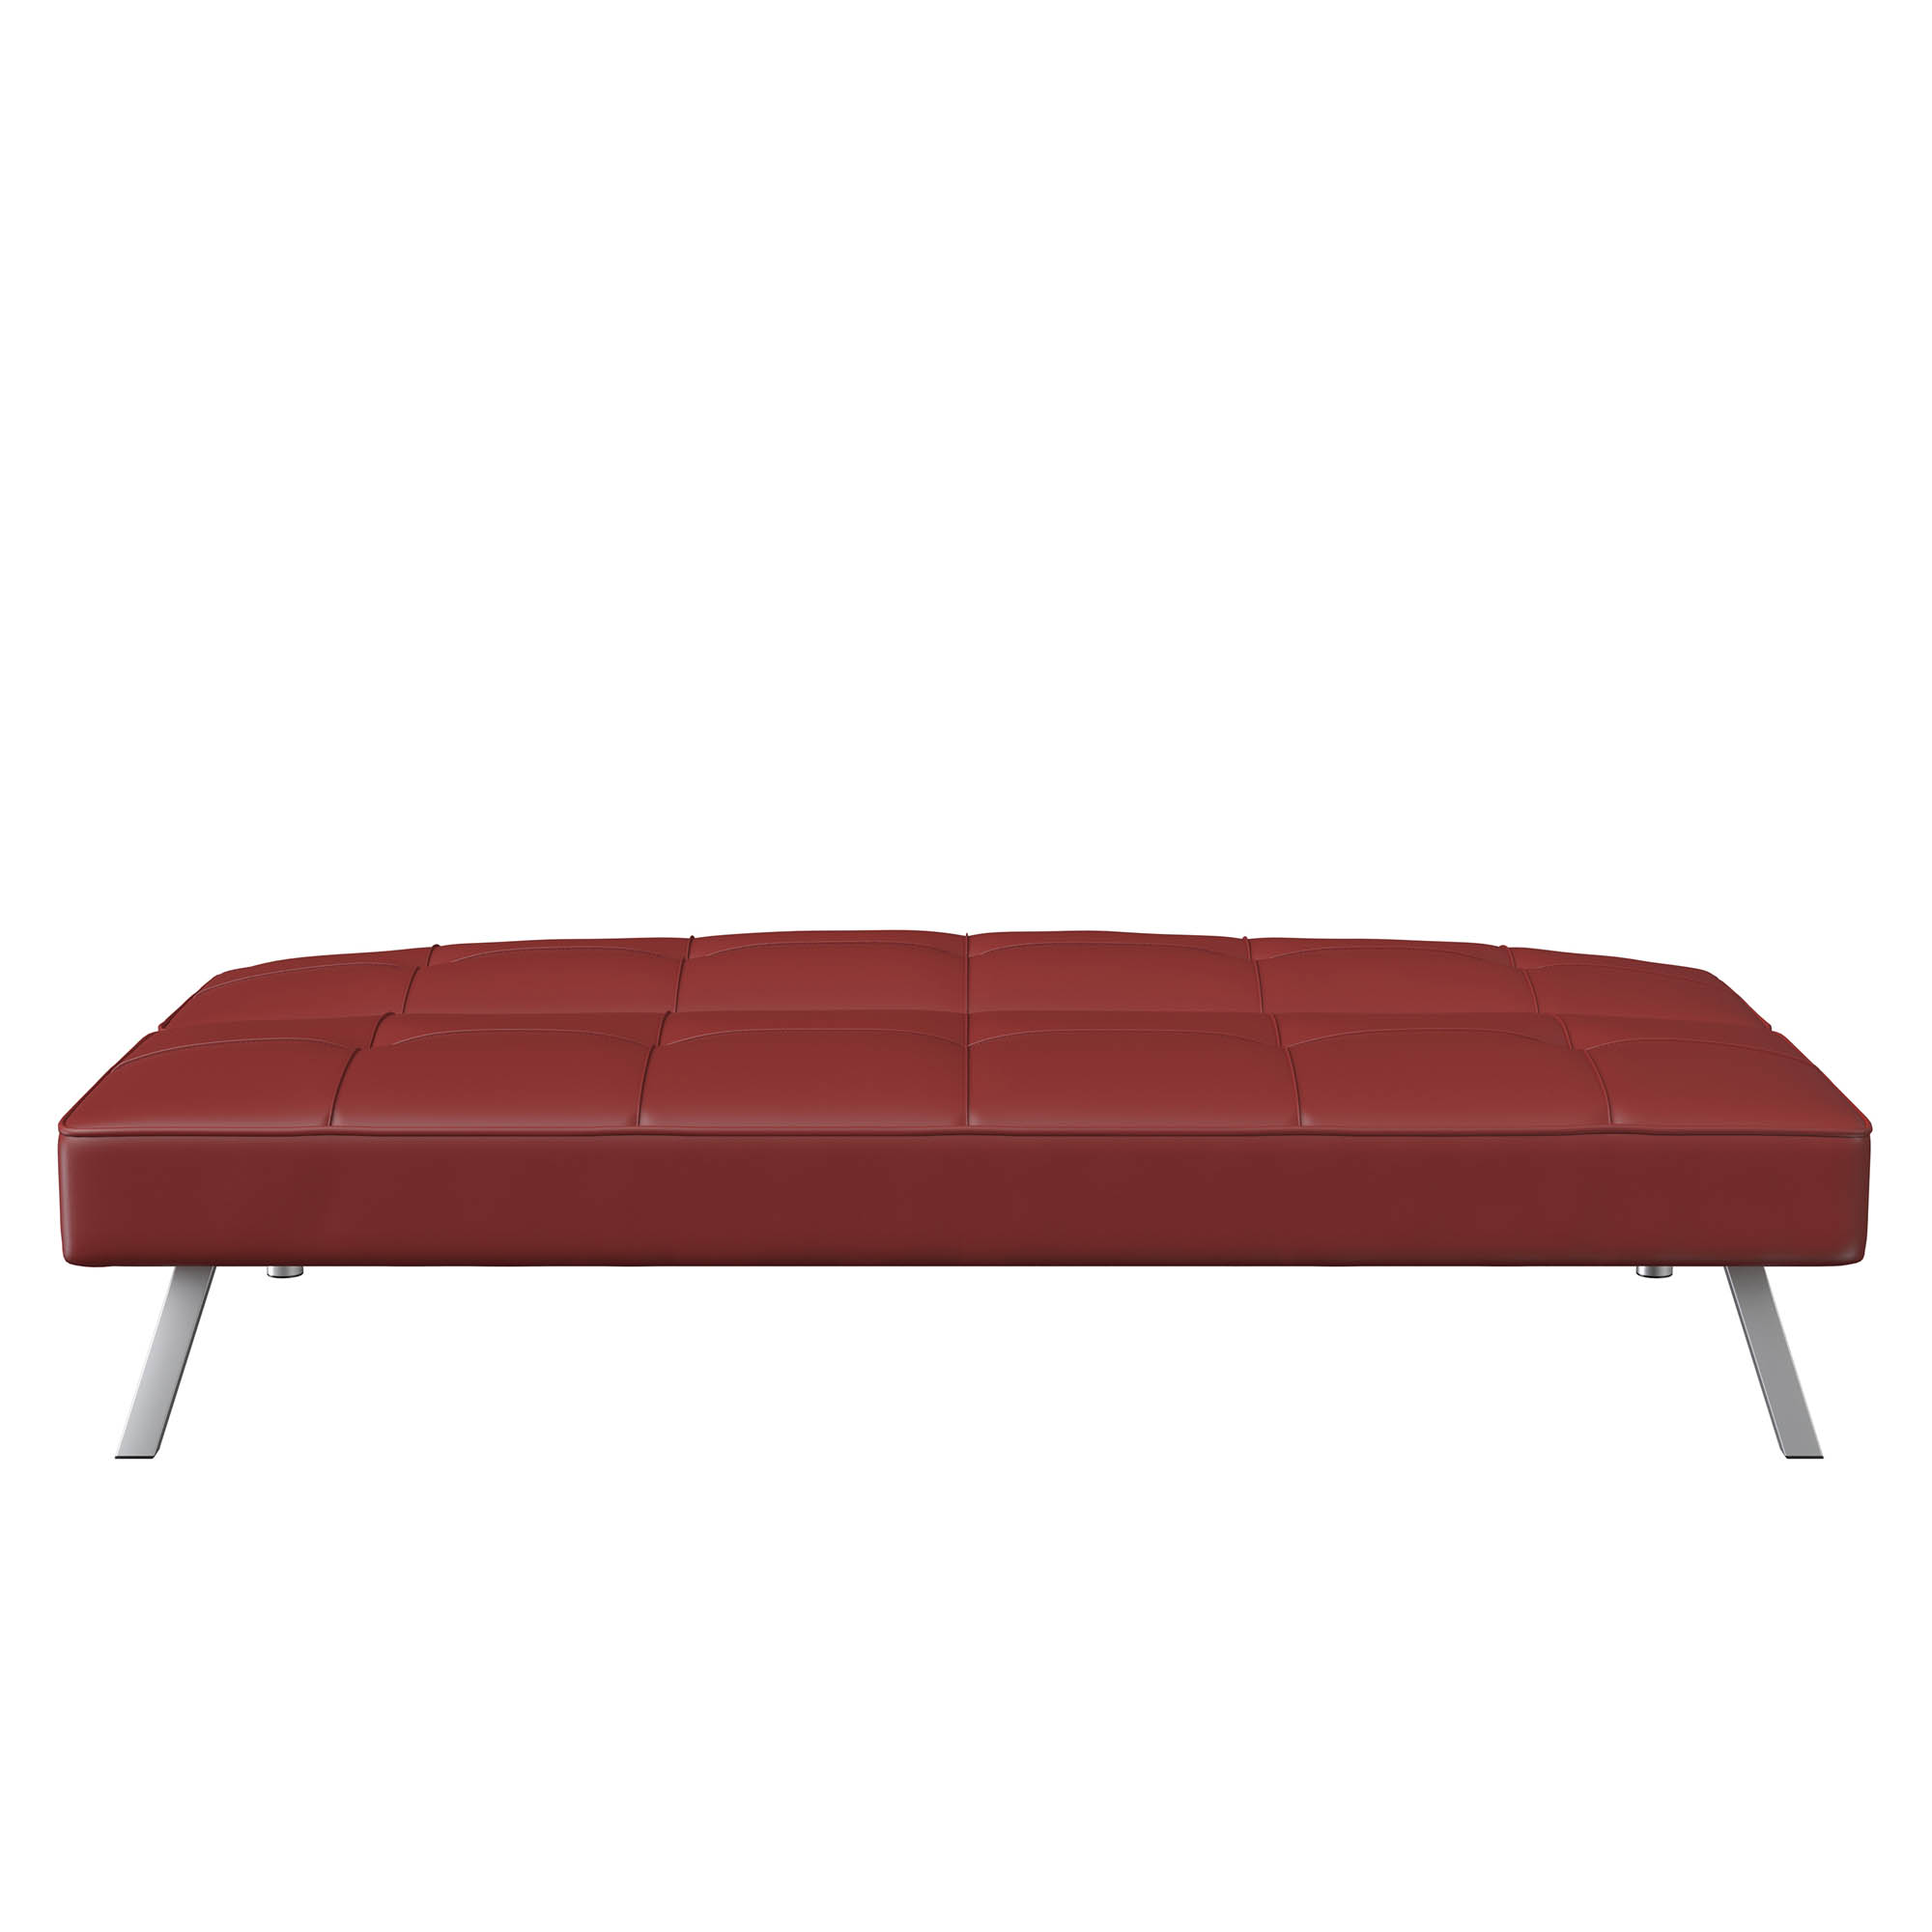 Serta Chelsea Modern Futon, Red Faux Leather - image 5 of 12